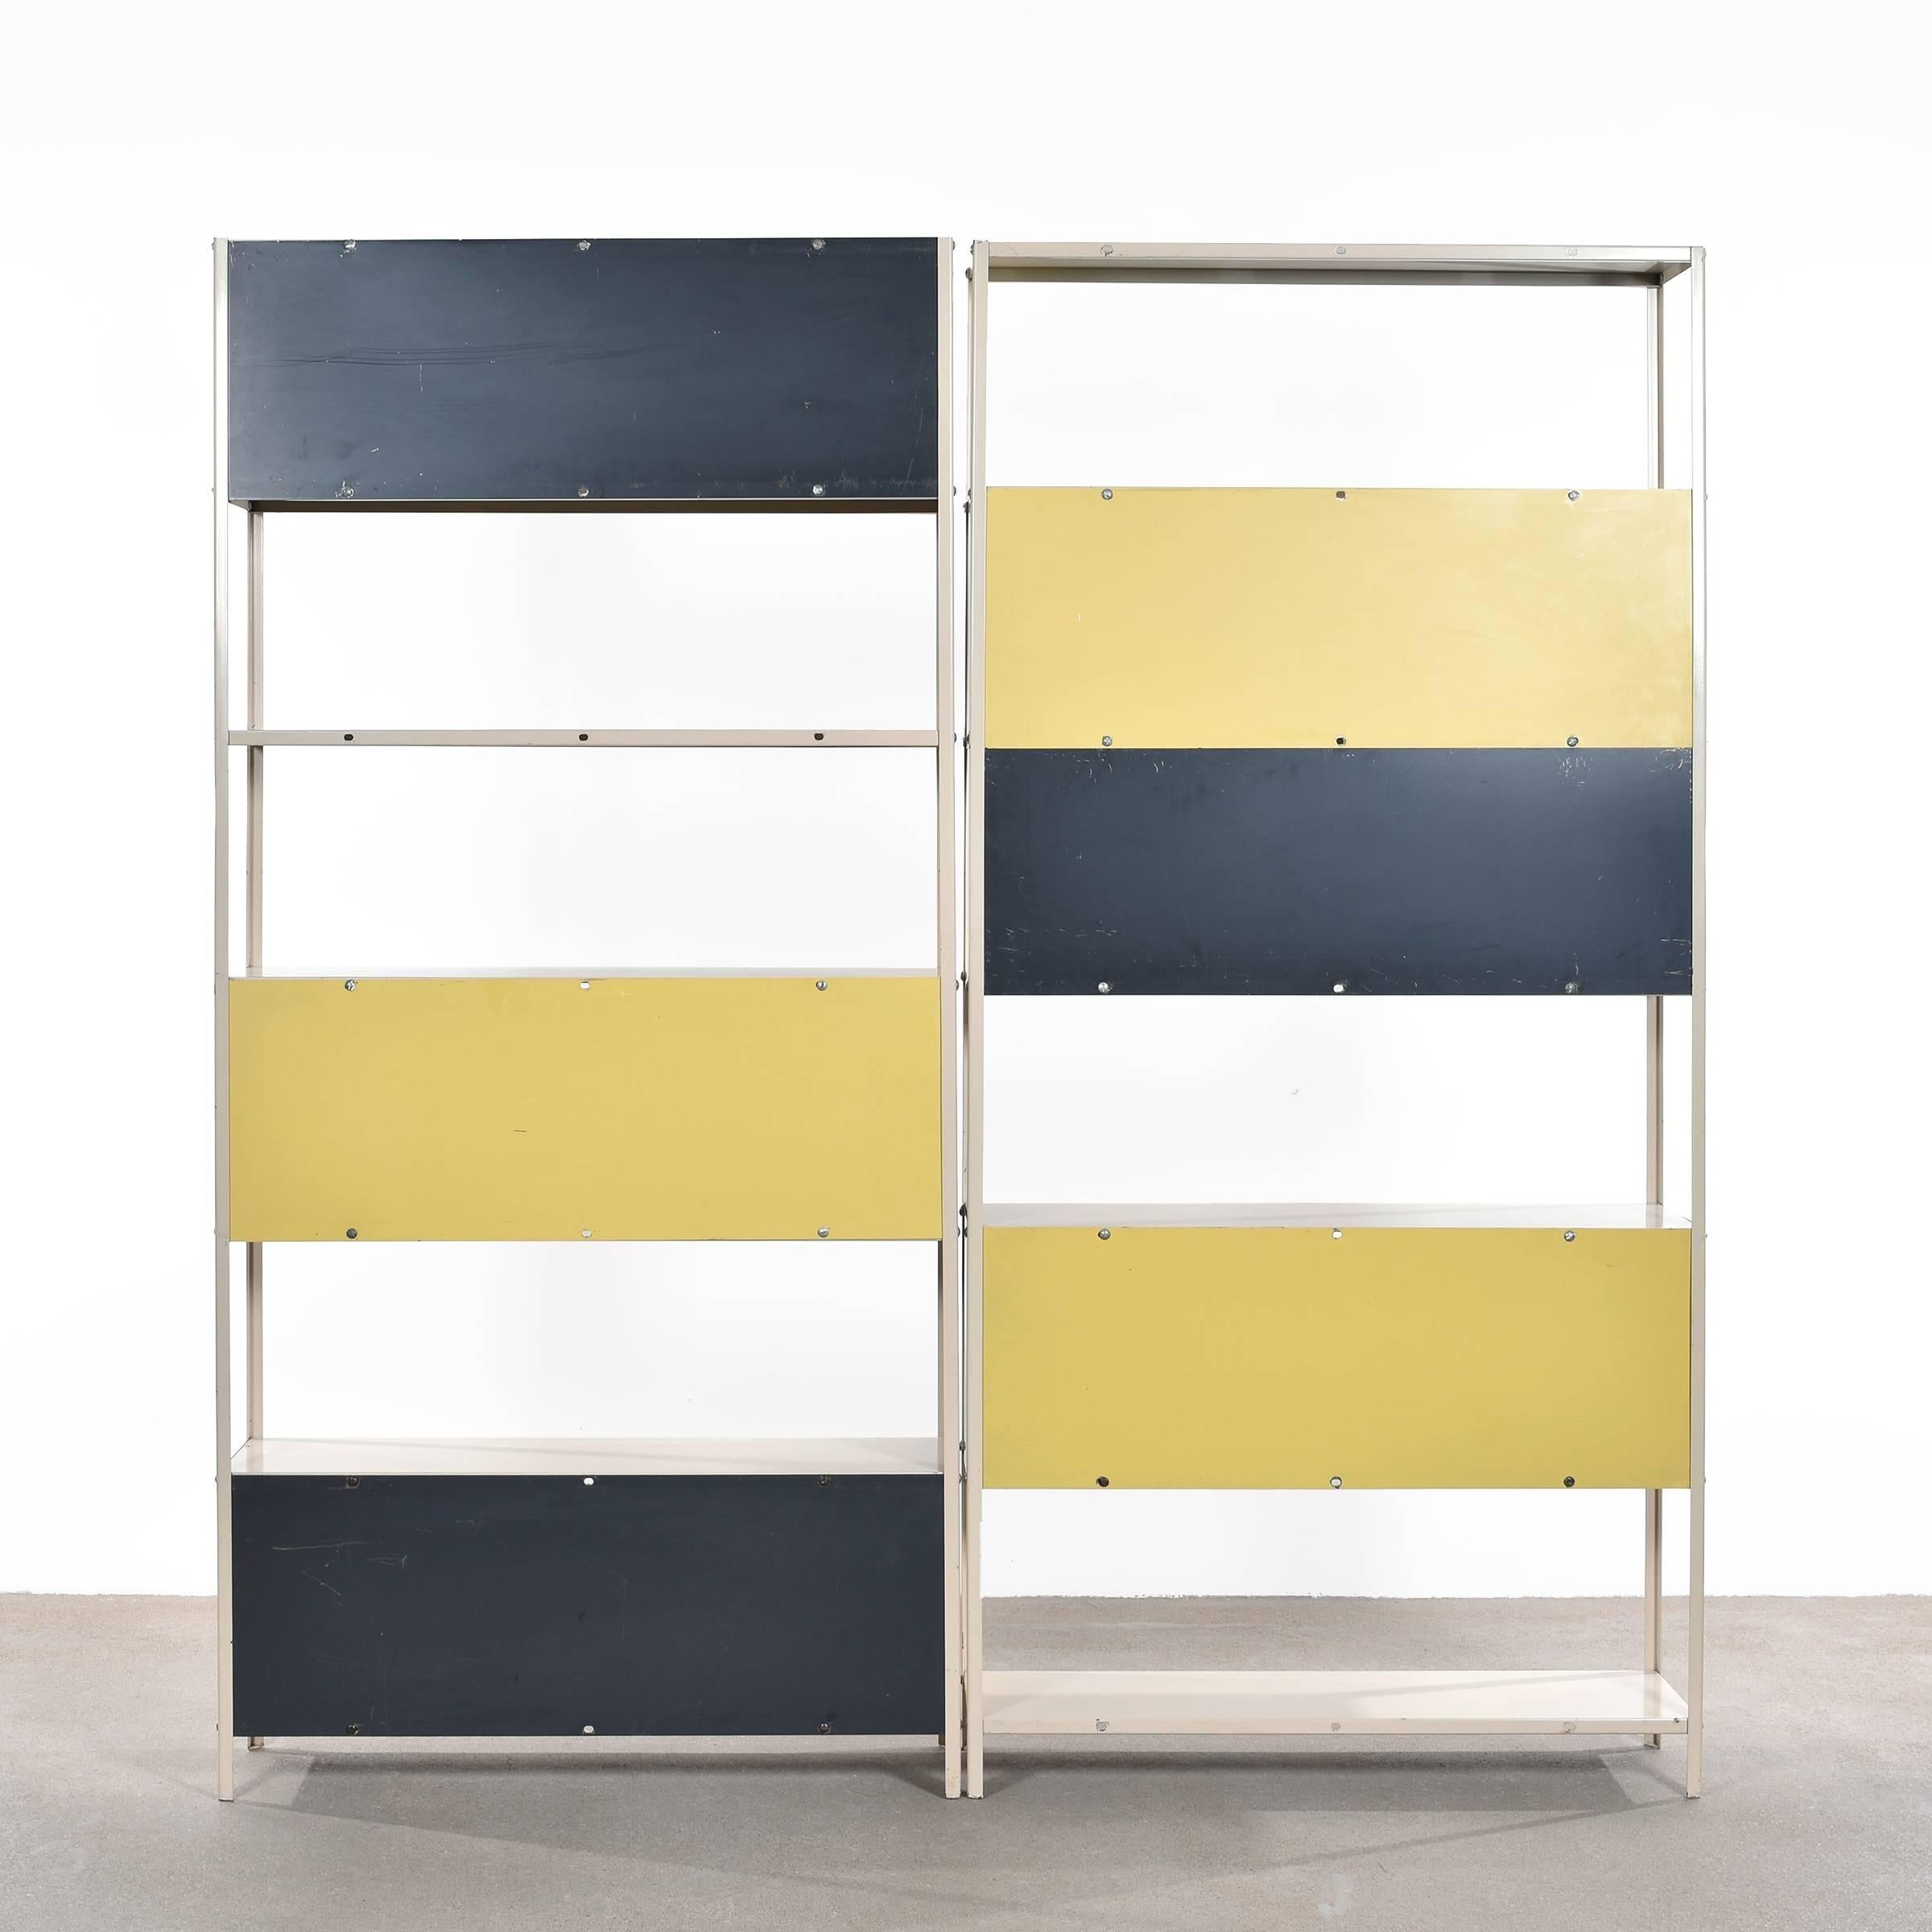 Rare modular bookcase/room divider designed by Friso Kramer in 1953 for 'De Bijenkorf' and produced by Asmeta. The two units can easily be combined to one if desired. Minimalistic industrial Dutch design in good original condition.

Free shipping